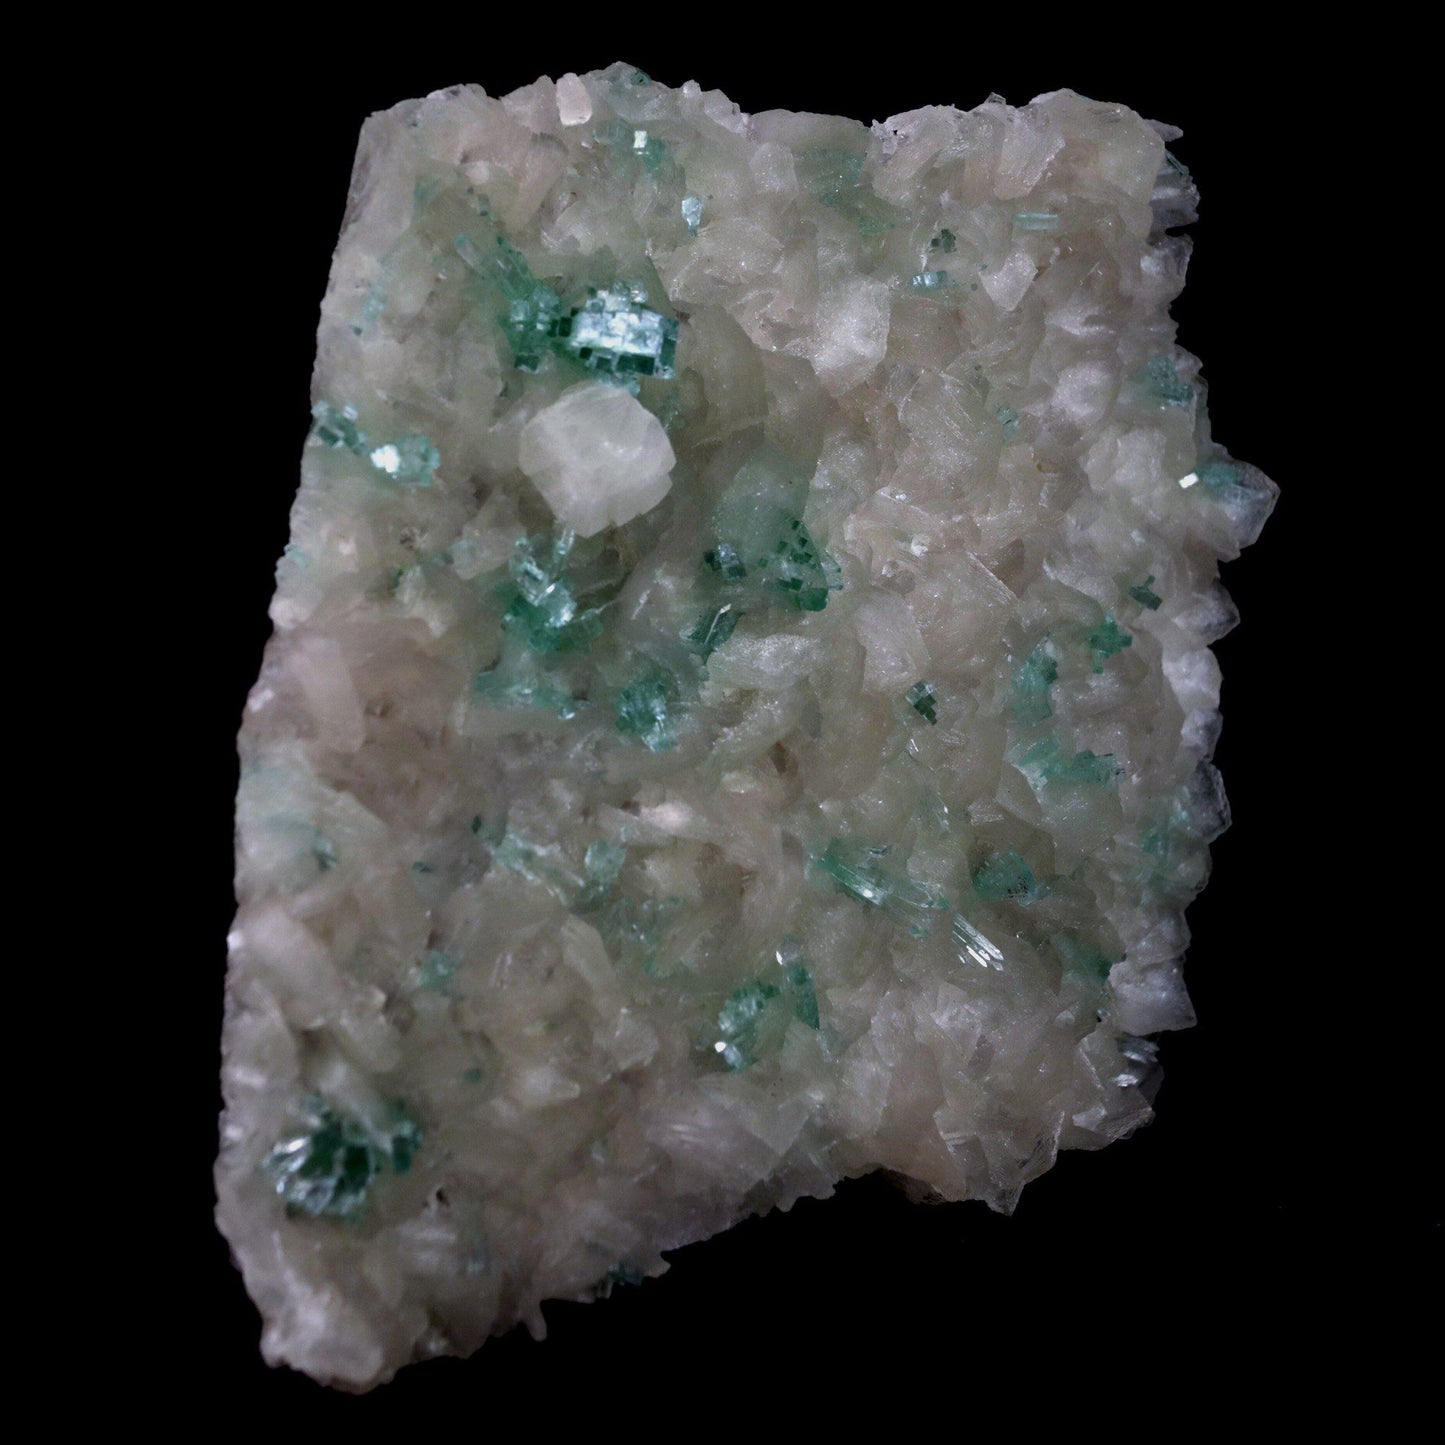 Green Apophyllite with Stilbite, Powellite Rare Find Natural Mineral S…  https://www.superbminerals.us/products/green-apophyllite-with-stilbite-powellite-rare-find-natural-mineral-specimen-b-4768  Features: We have a striking crystal perched elegantly in apophyllite and stilbite crystal nests that are elongated and dramatic! This is a noteworthy specimen in terms of the powellite's own size and the combination's overall appearance. The crystal is a double-terminated, transparent, satiny powellite crystal 